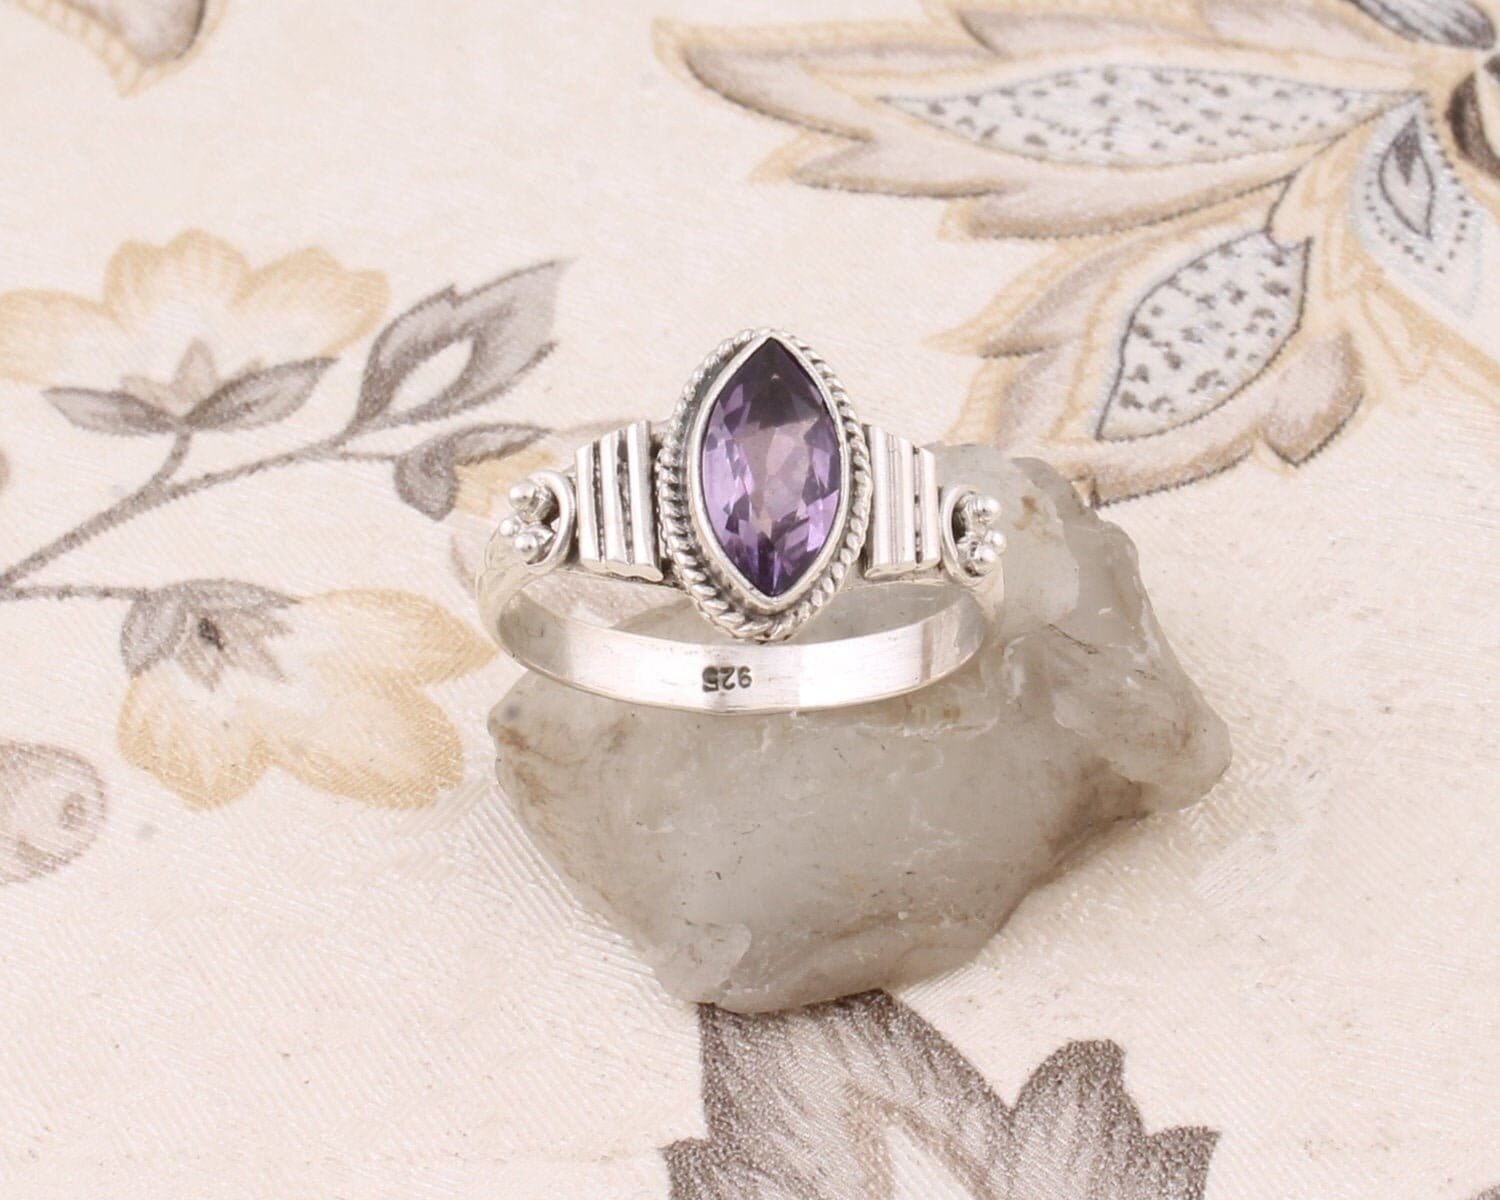 Natural Amazing Amethyst Gemstone Ring Cut Stone Boho Ring 925-Solid Sterling Silver Ring,Index Finger Ring Gift For You ! L#-282619-R